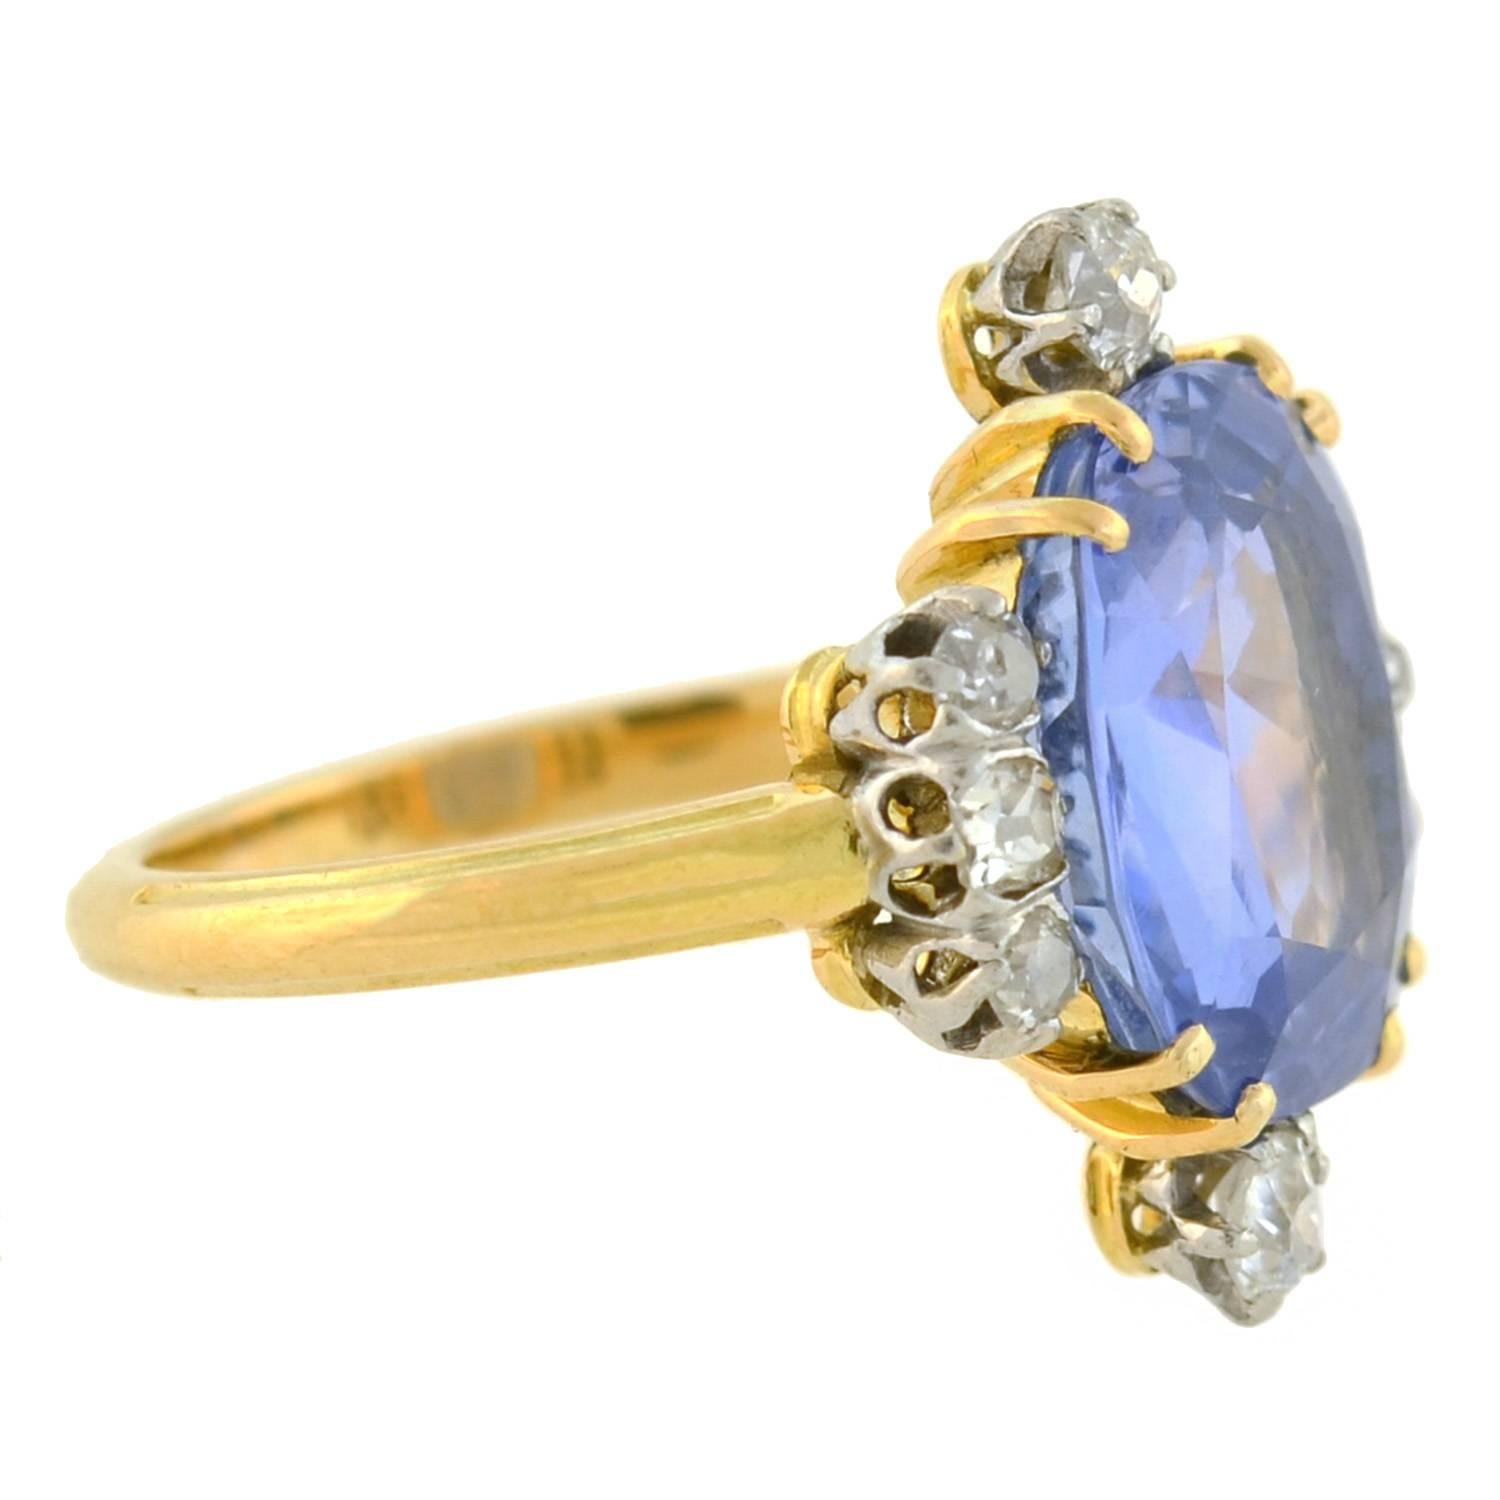 An exquisite sapphire ring from the Edwardian (ca1910s) era! Made of 18kt yellow gold, the ring holds a stunning natural, no heat sapphire at the center, framed by sparkling diamonds on all four sides. The Ceylon (Sri Lankan) sapphire weighs 6.80ct,